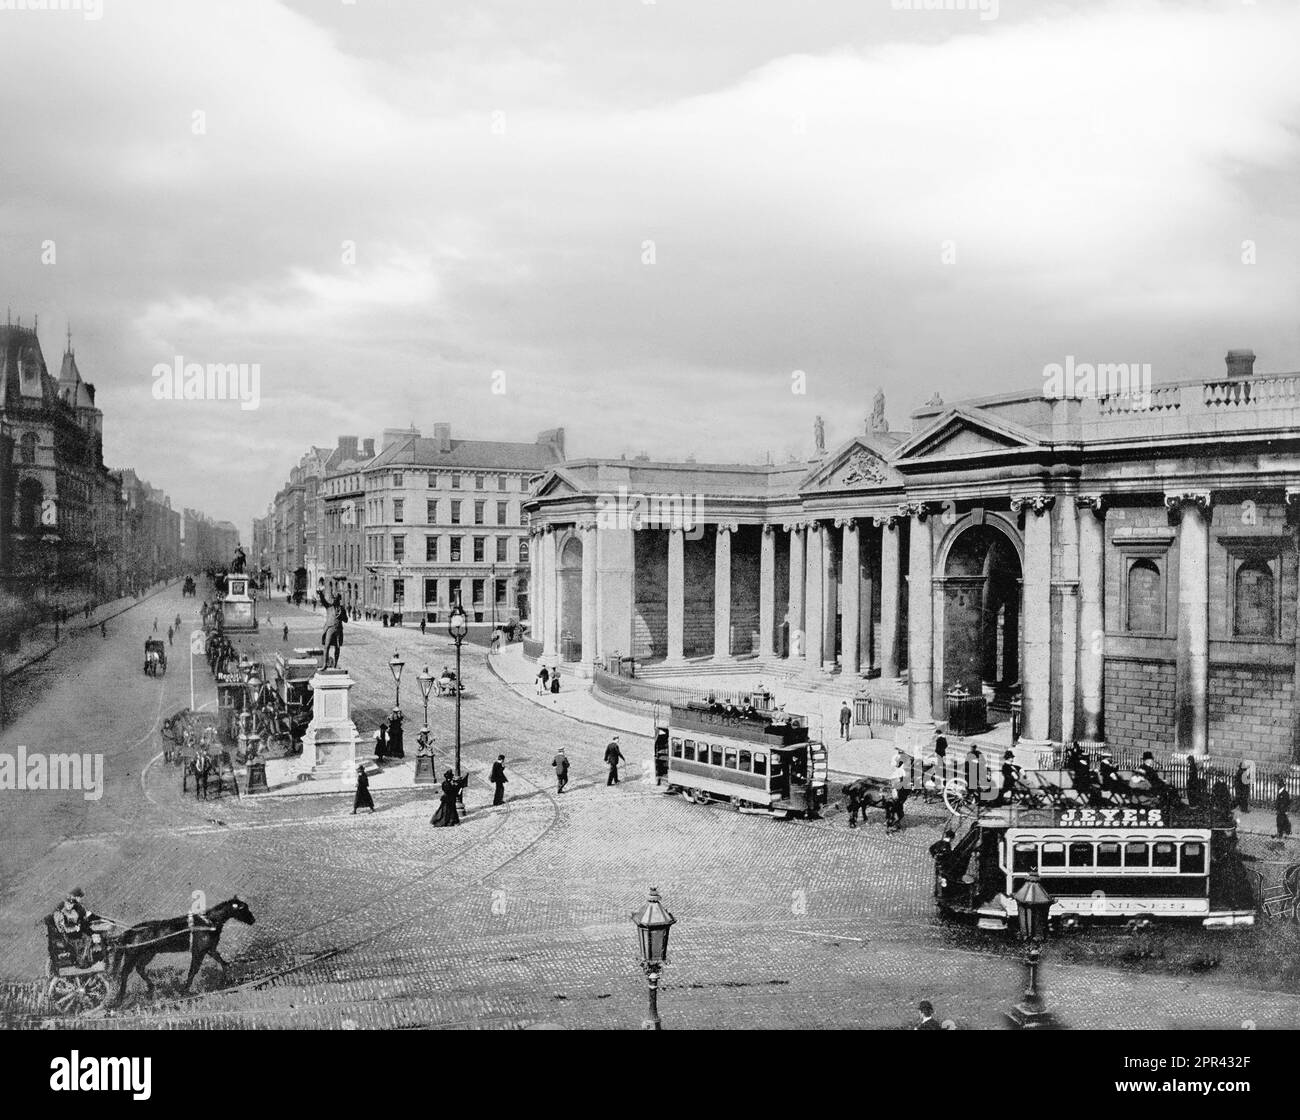 A late 19th century photograph of College Green in the centre of Dublin, Ireland. On its northern side is the Bank of Ireland building, which until 1800 was Ireland's Parliament House. It was originally constructed by Arthur Chichester, 1st Baron Chichester in the early 17th century and later adapted for the Irish Parliament around 1670. It was replaced by a new Parliament House in 1729, designed by Edward Lovett Pearce, it was later enlarged by James Gandon in 1787 and Edward Parke between 1804 and 1808. The site is now the Bank of Ireland. Stock Photo